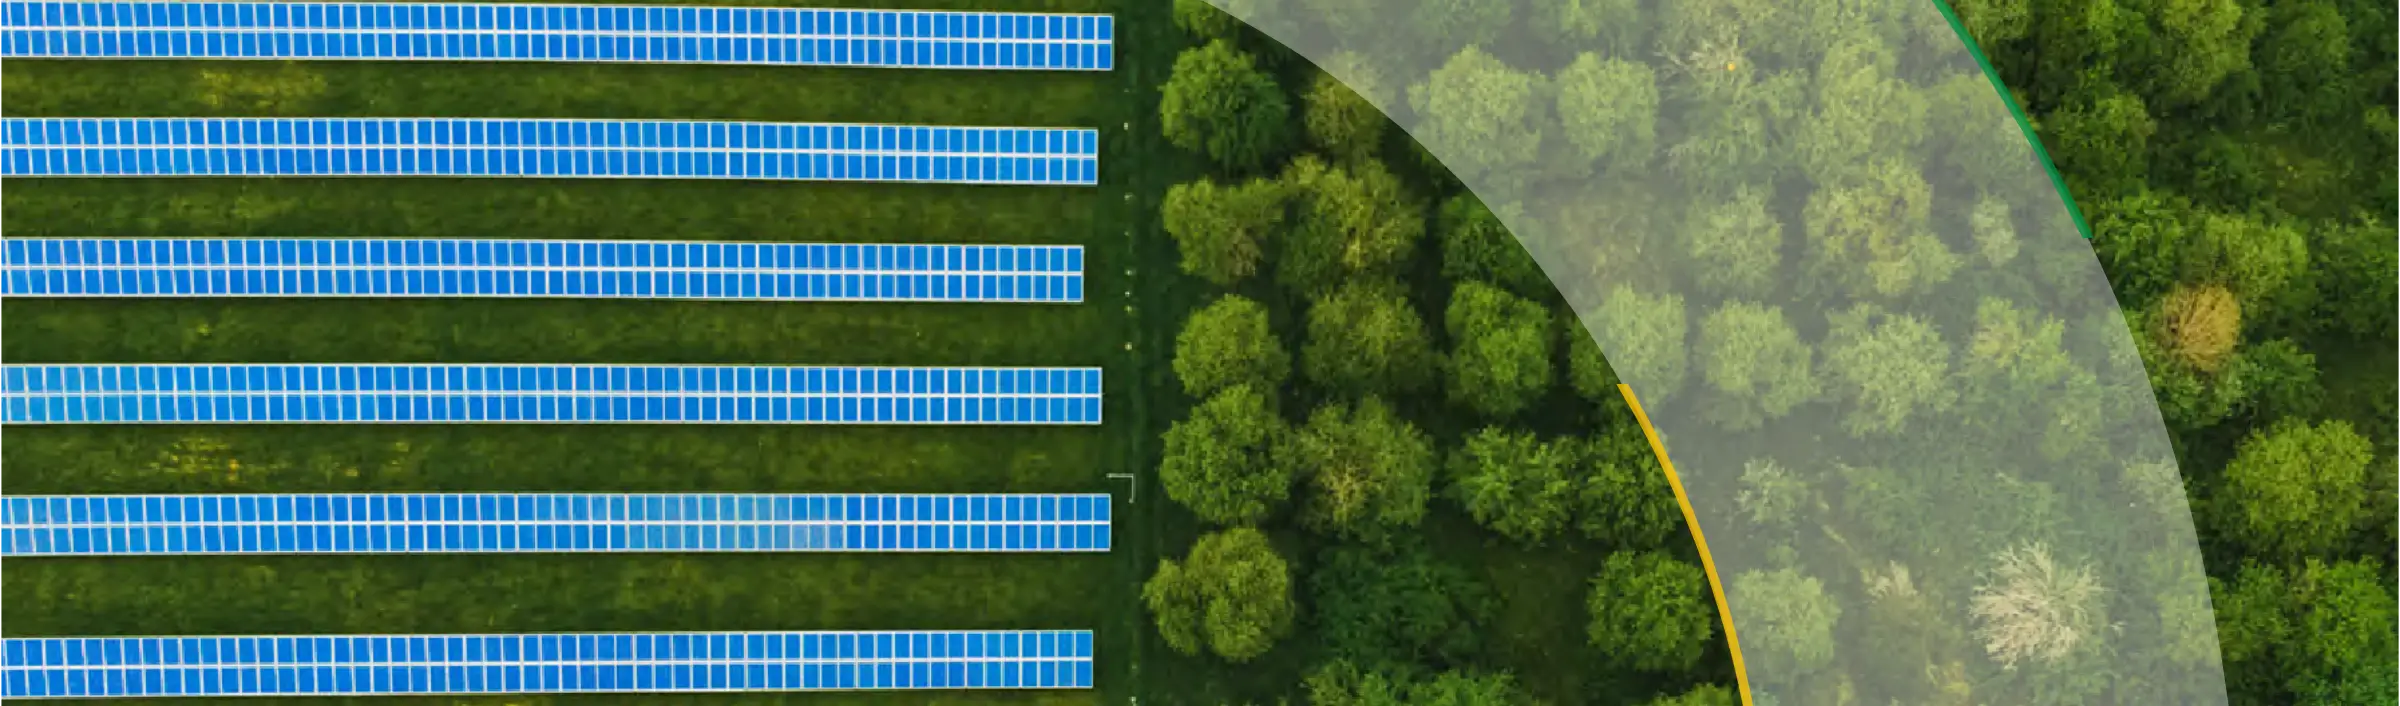 green trees next to a field full of solar panels viewed from above